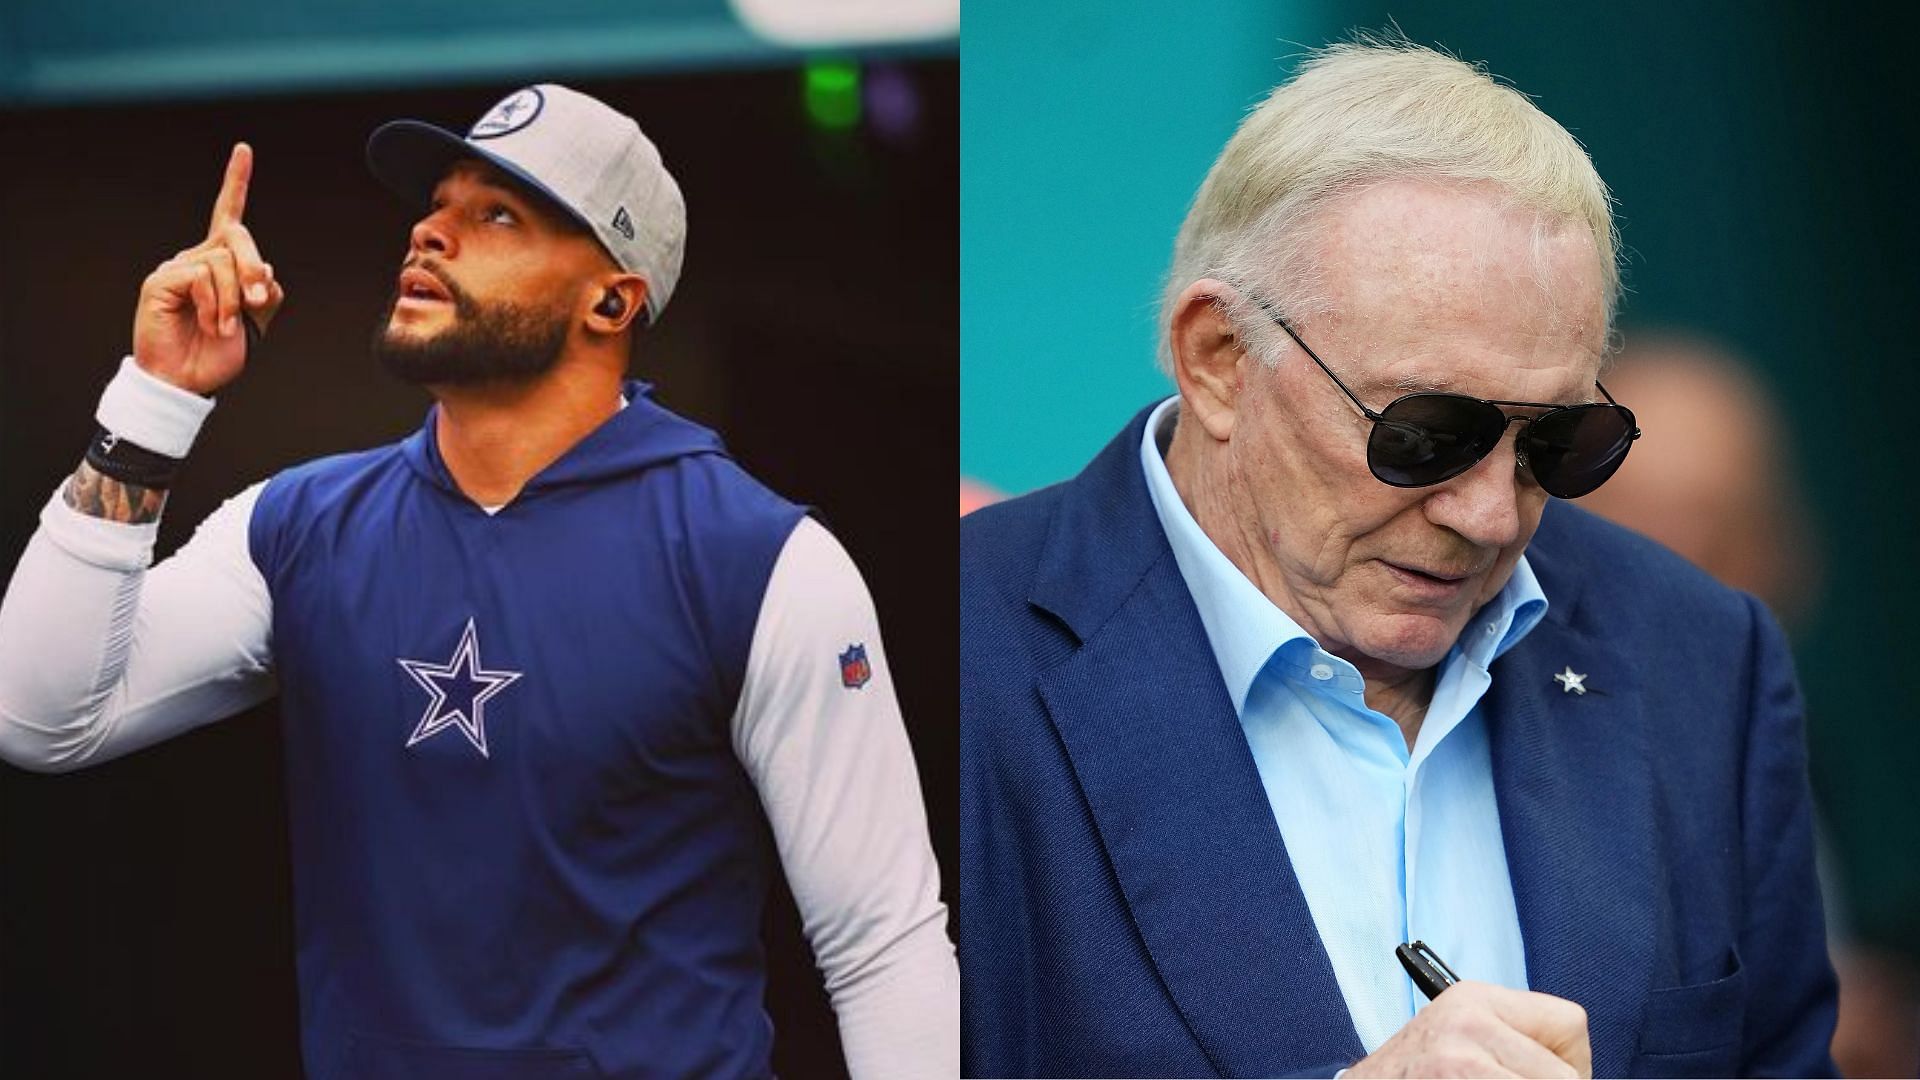 Dak Prescott provides clarity on contract negotiations with Cowboys owner Jerry Jones with $120,000,000 deal running out